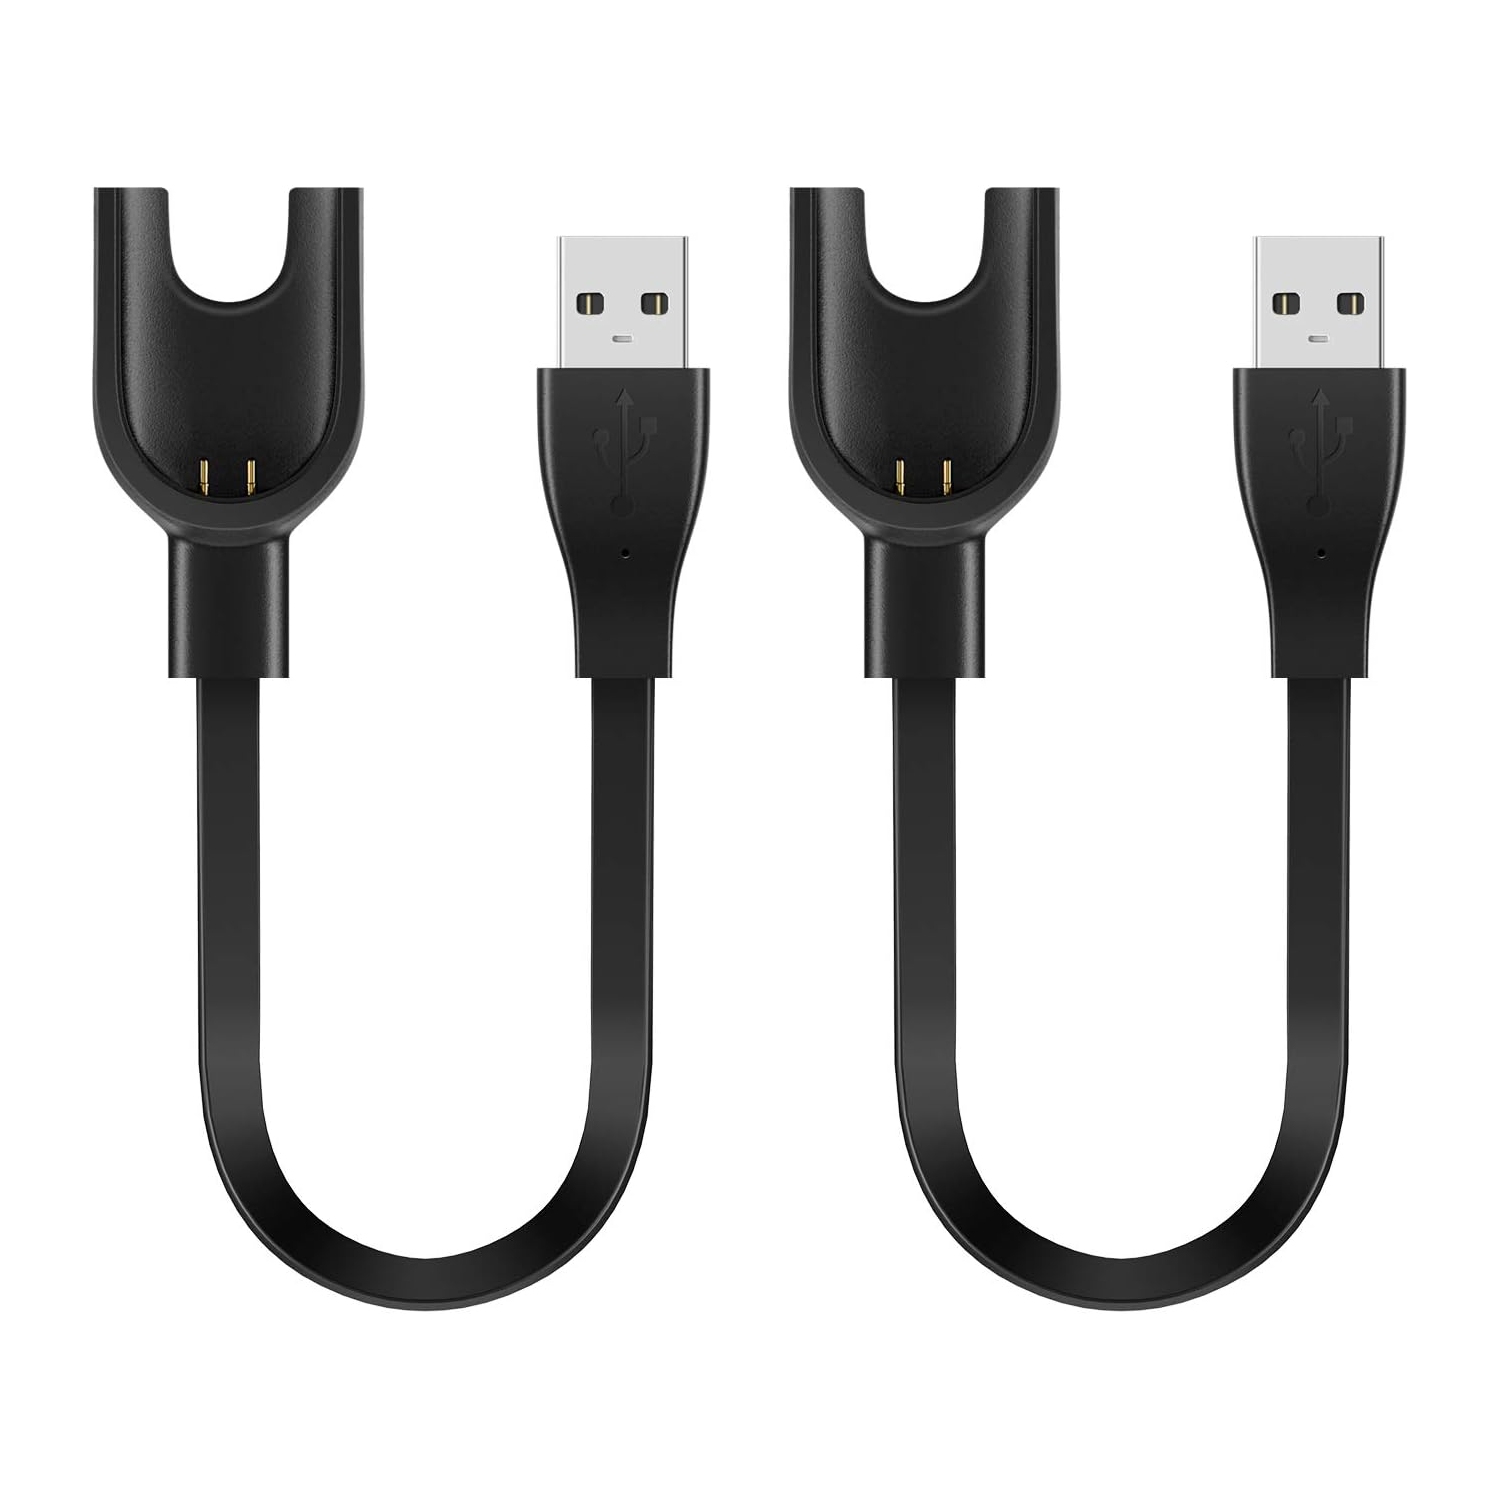 Charger Cable for Mi band 3 USB Charging Xiaomi 3 Smartwatch, 2-Pack